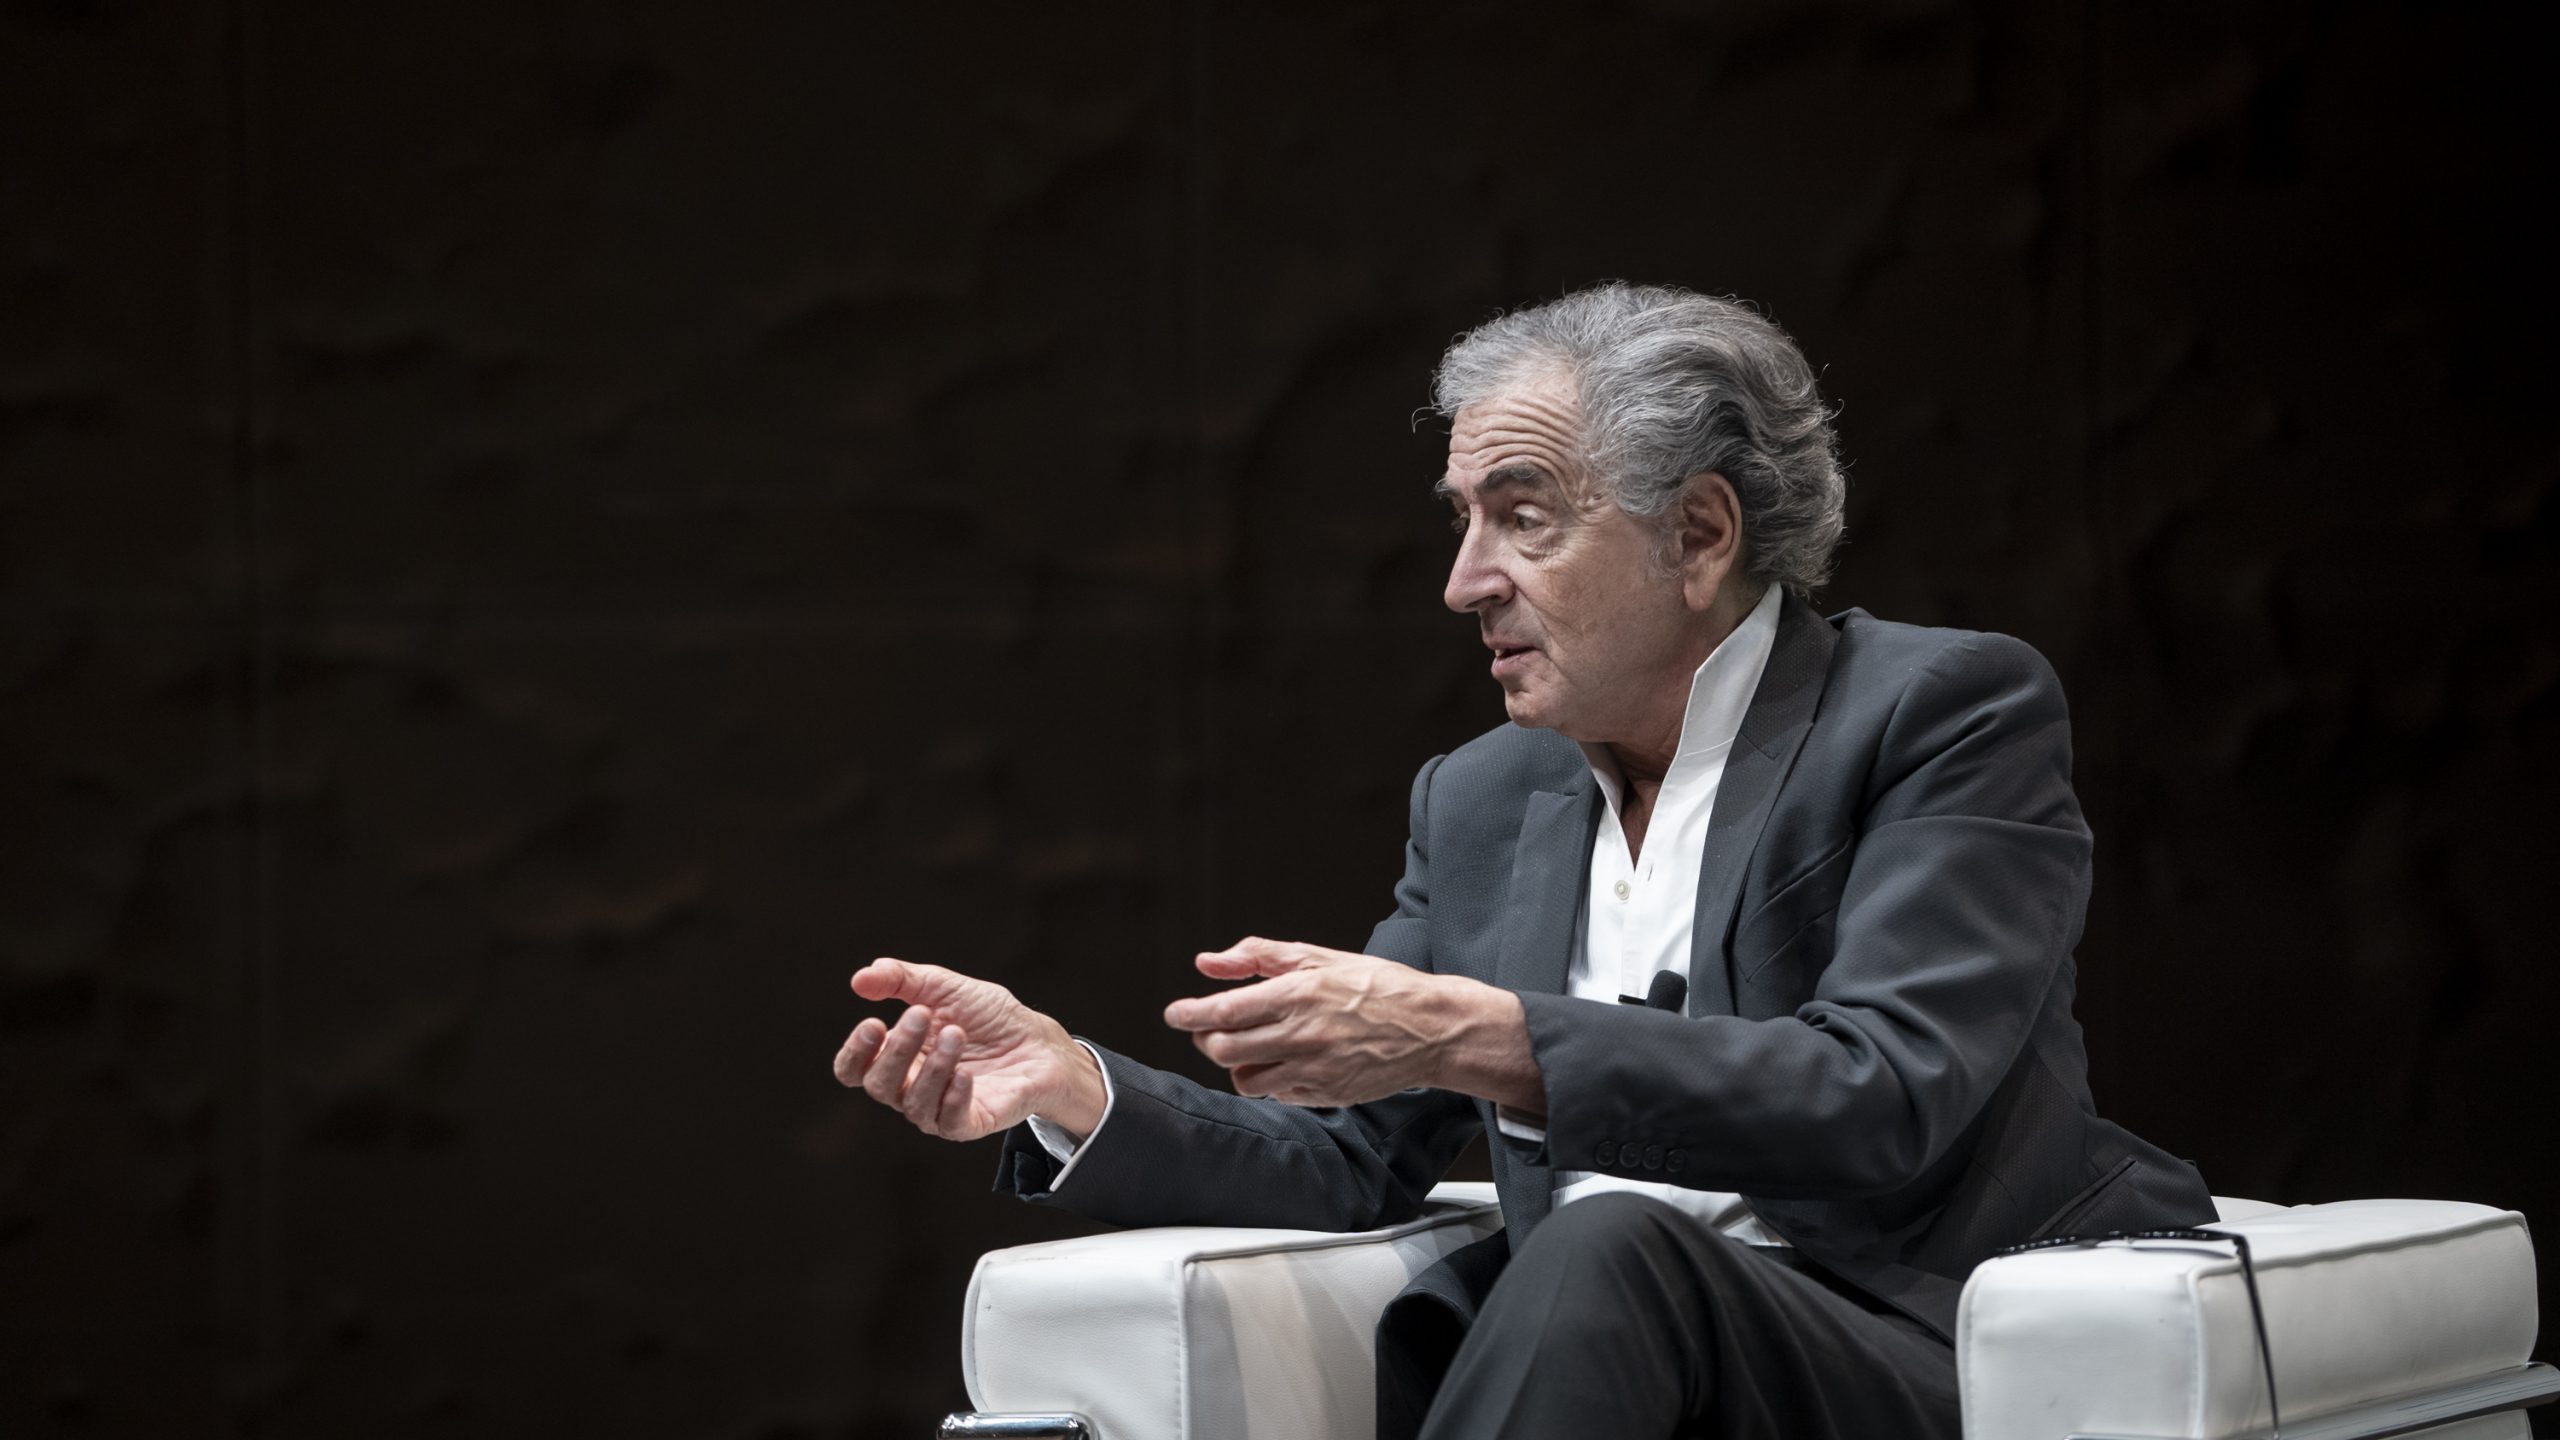 Bernard-Henri Lévy after the screening of his film "The Will to See" in Madrid